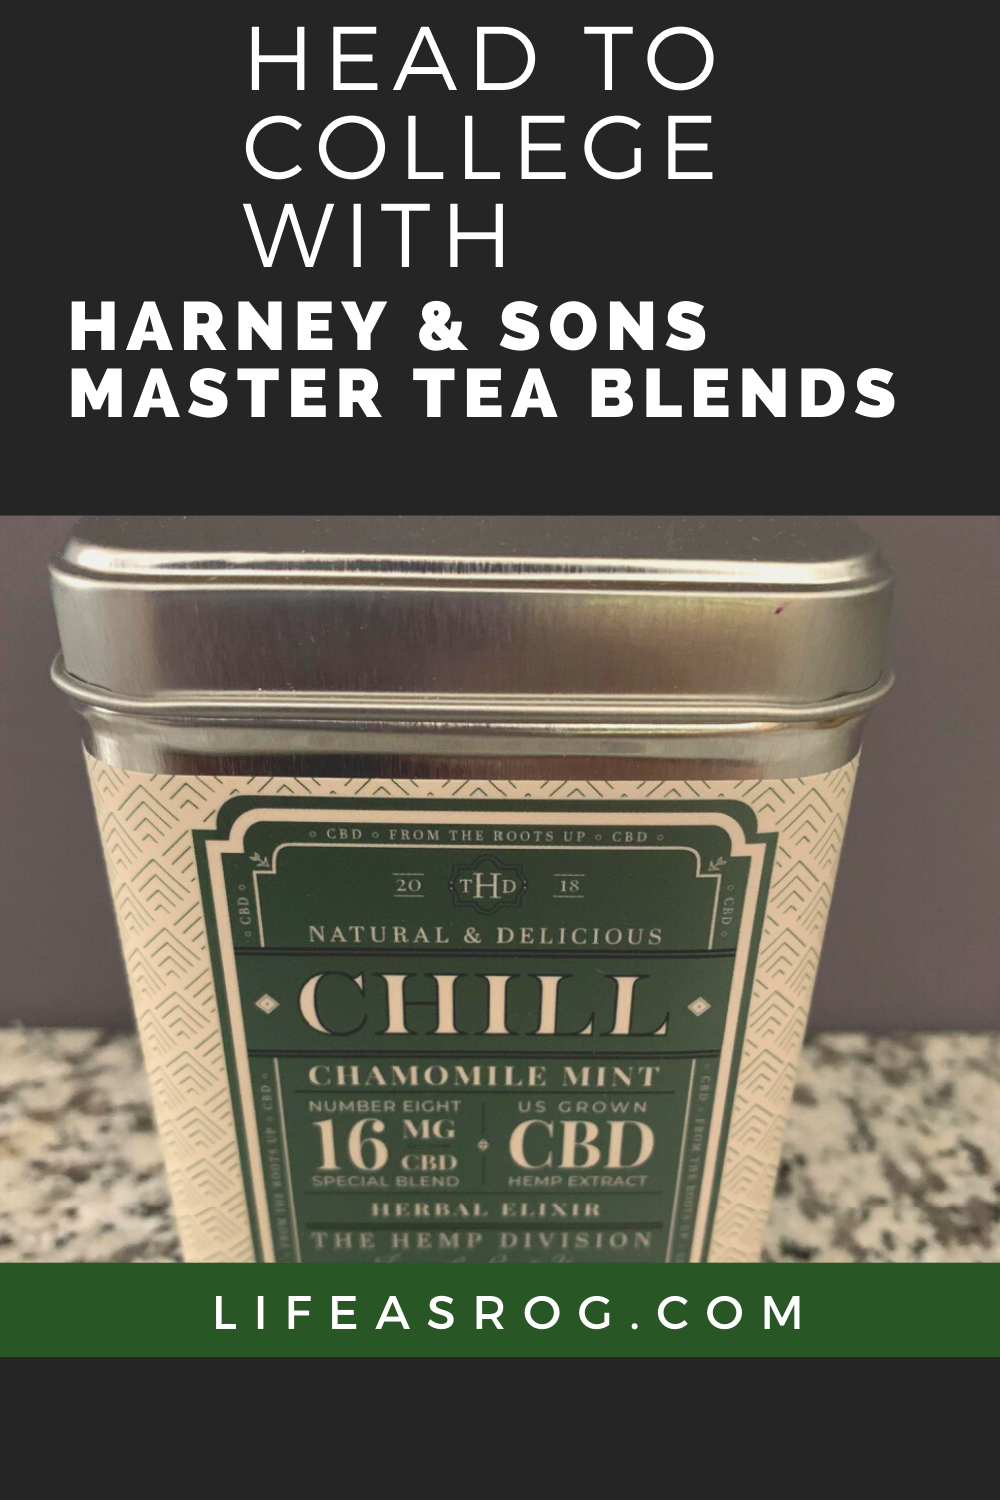 head to college with harney & sons master tea blends